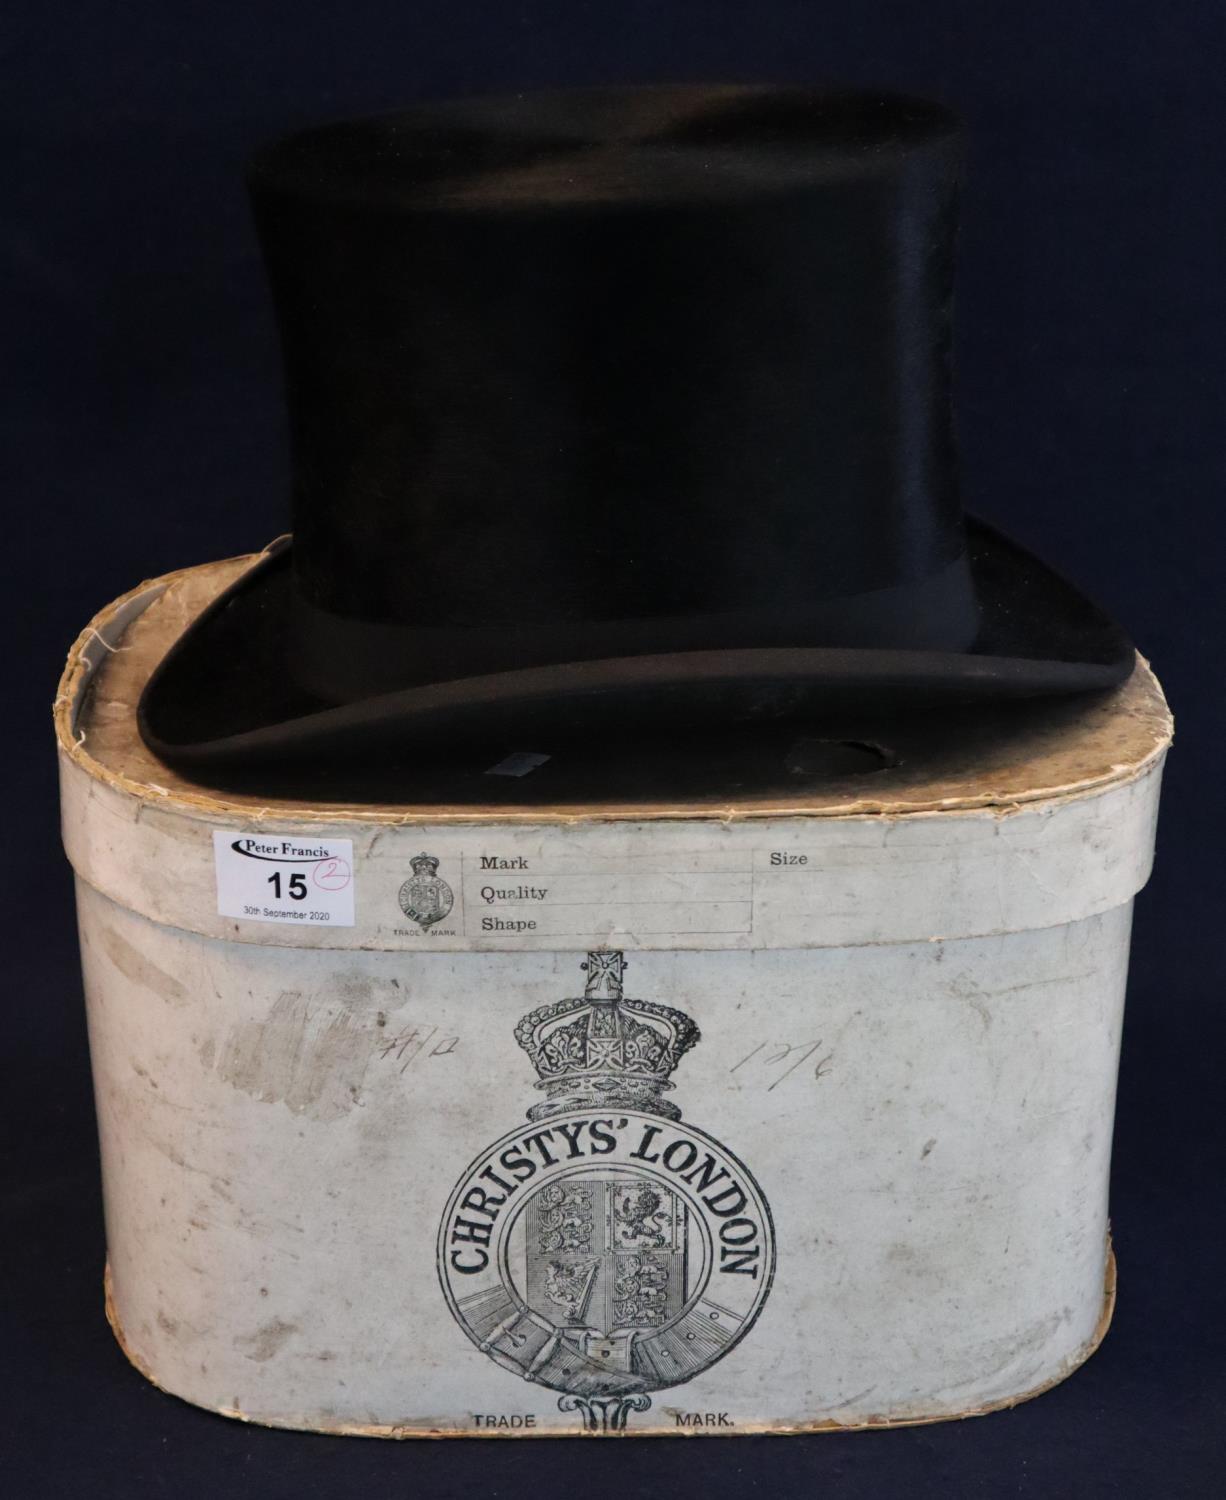 Christys' of London vintage top hat in original card box with printed labels (B.P. 21% + VAT).